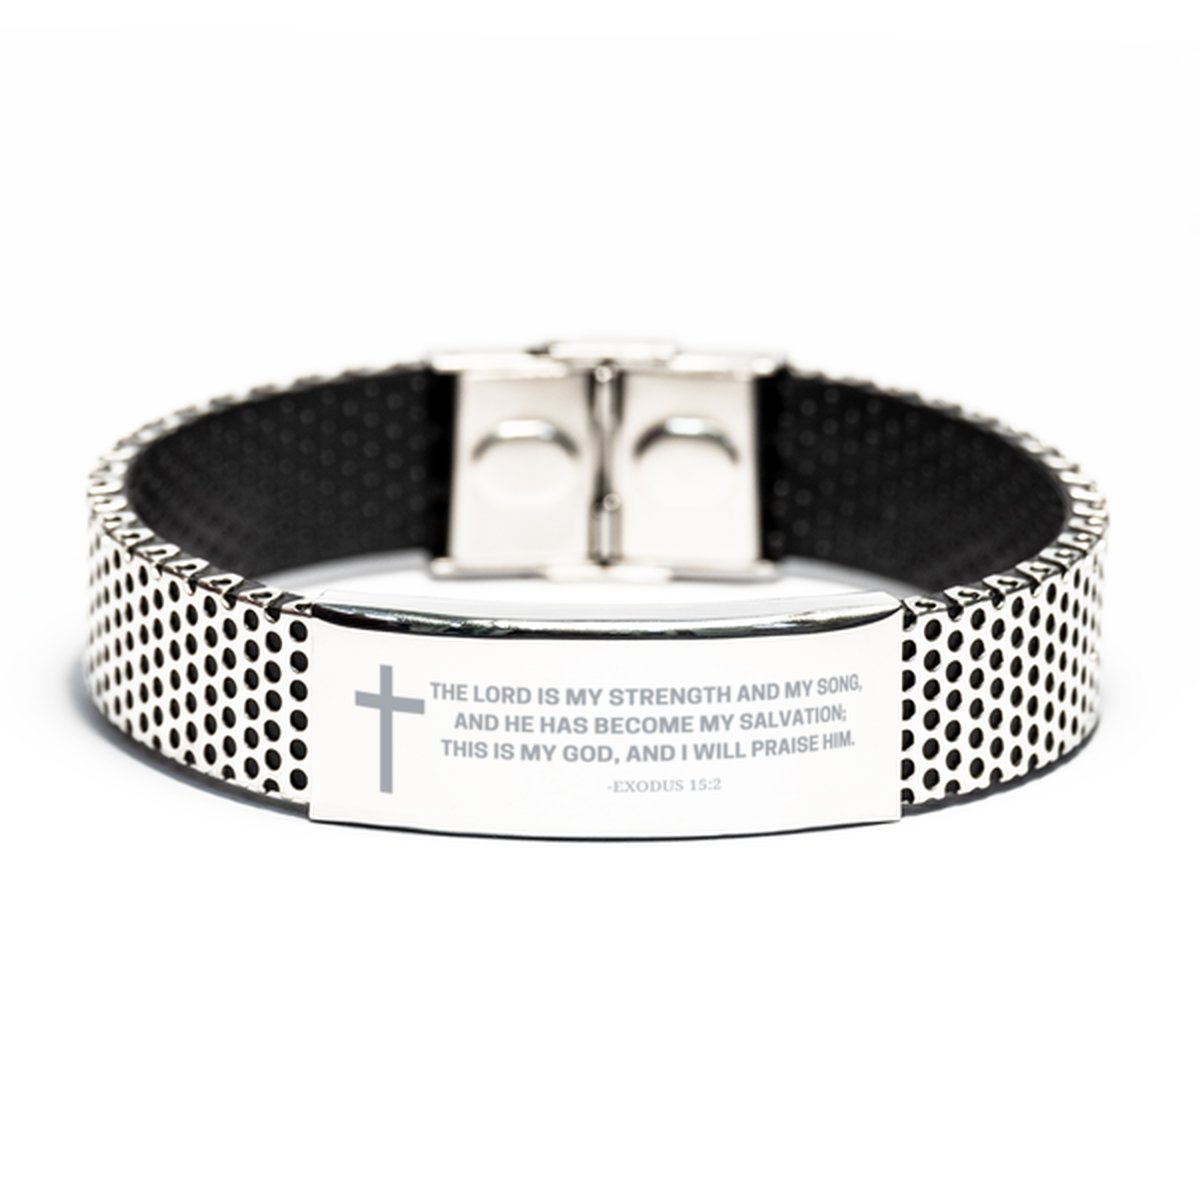 Baptism Gifts For Teenage Boys Girls, Christian Bible Verse Stainless Steel Bracelet, The Lord is my strength, Catholic Confirmation Gifts for Son, Godson, Grandson, Nephew